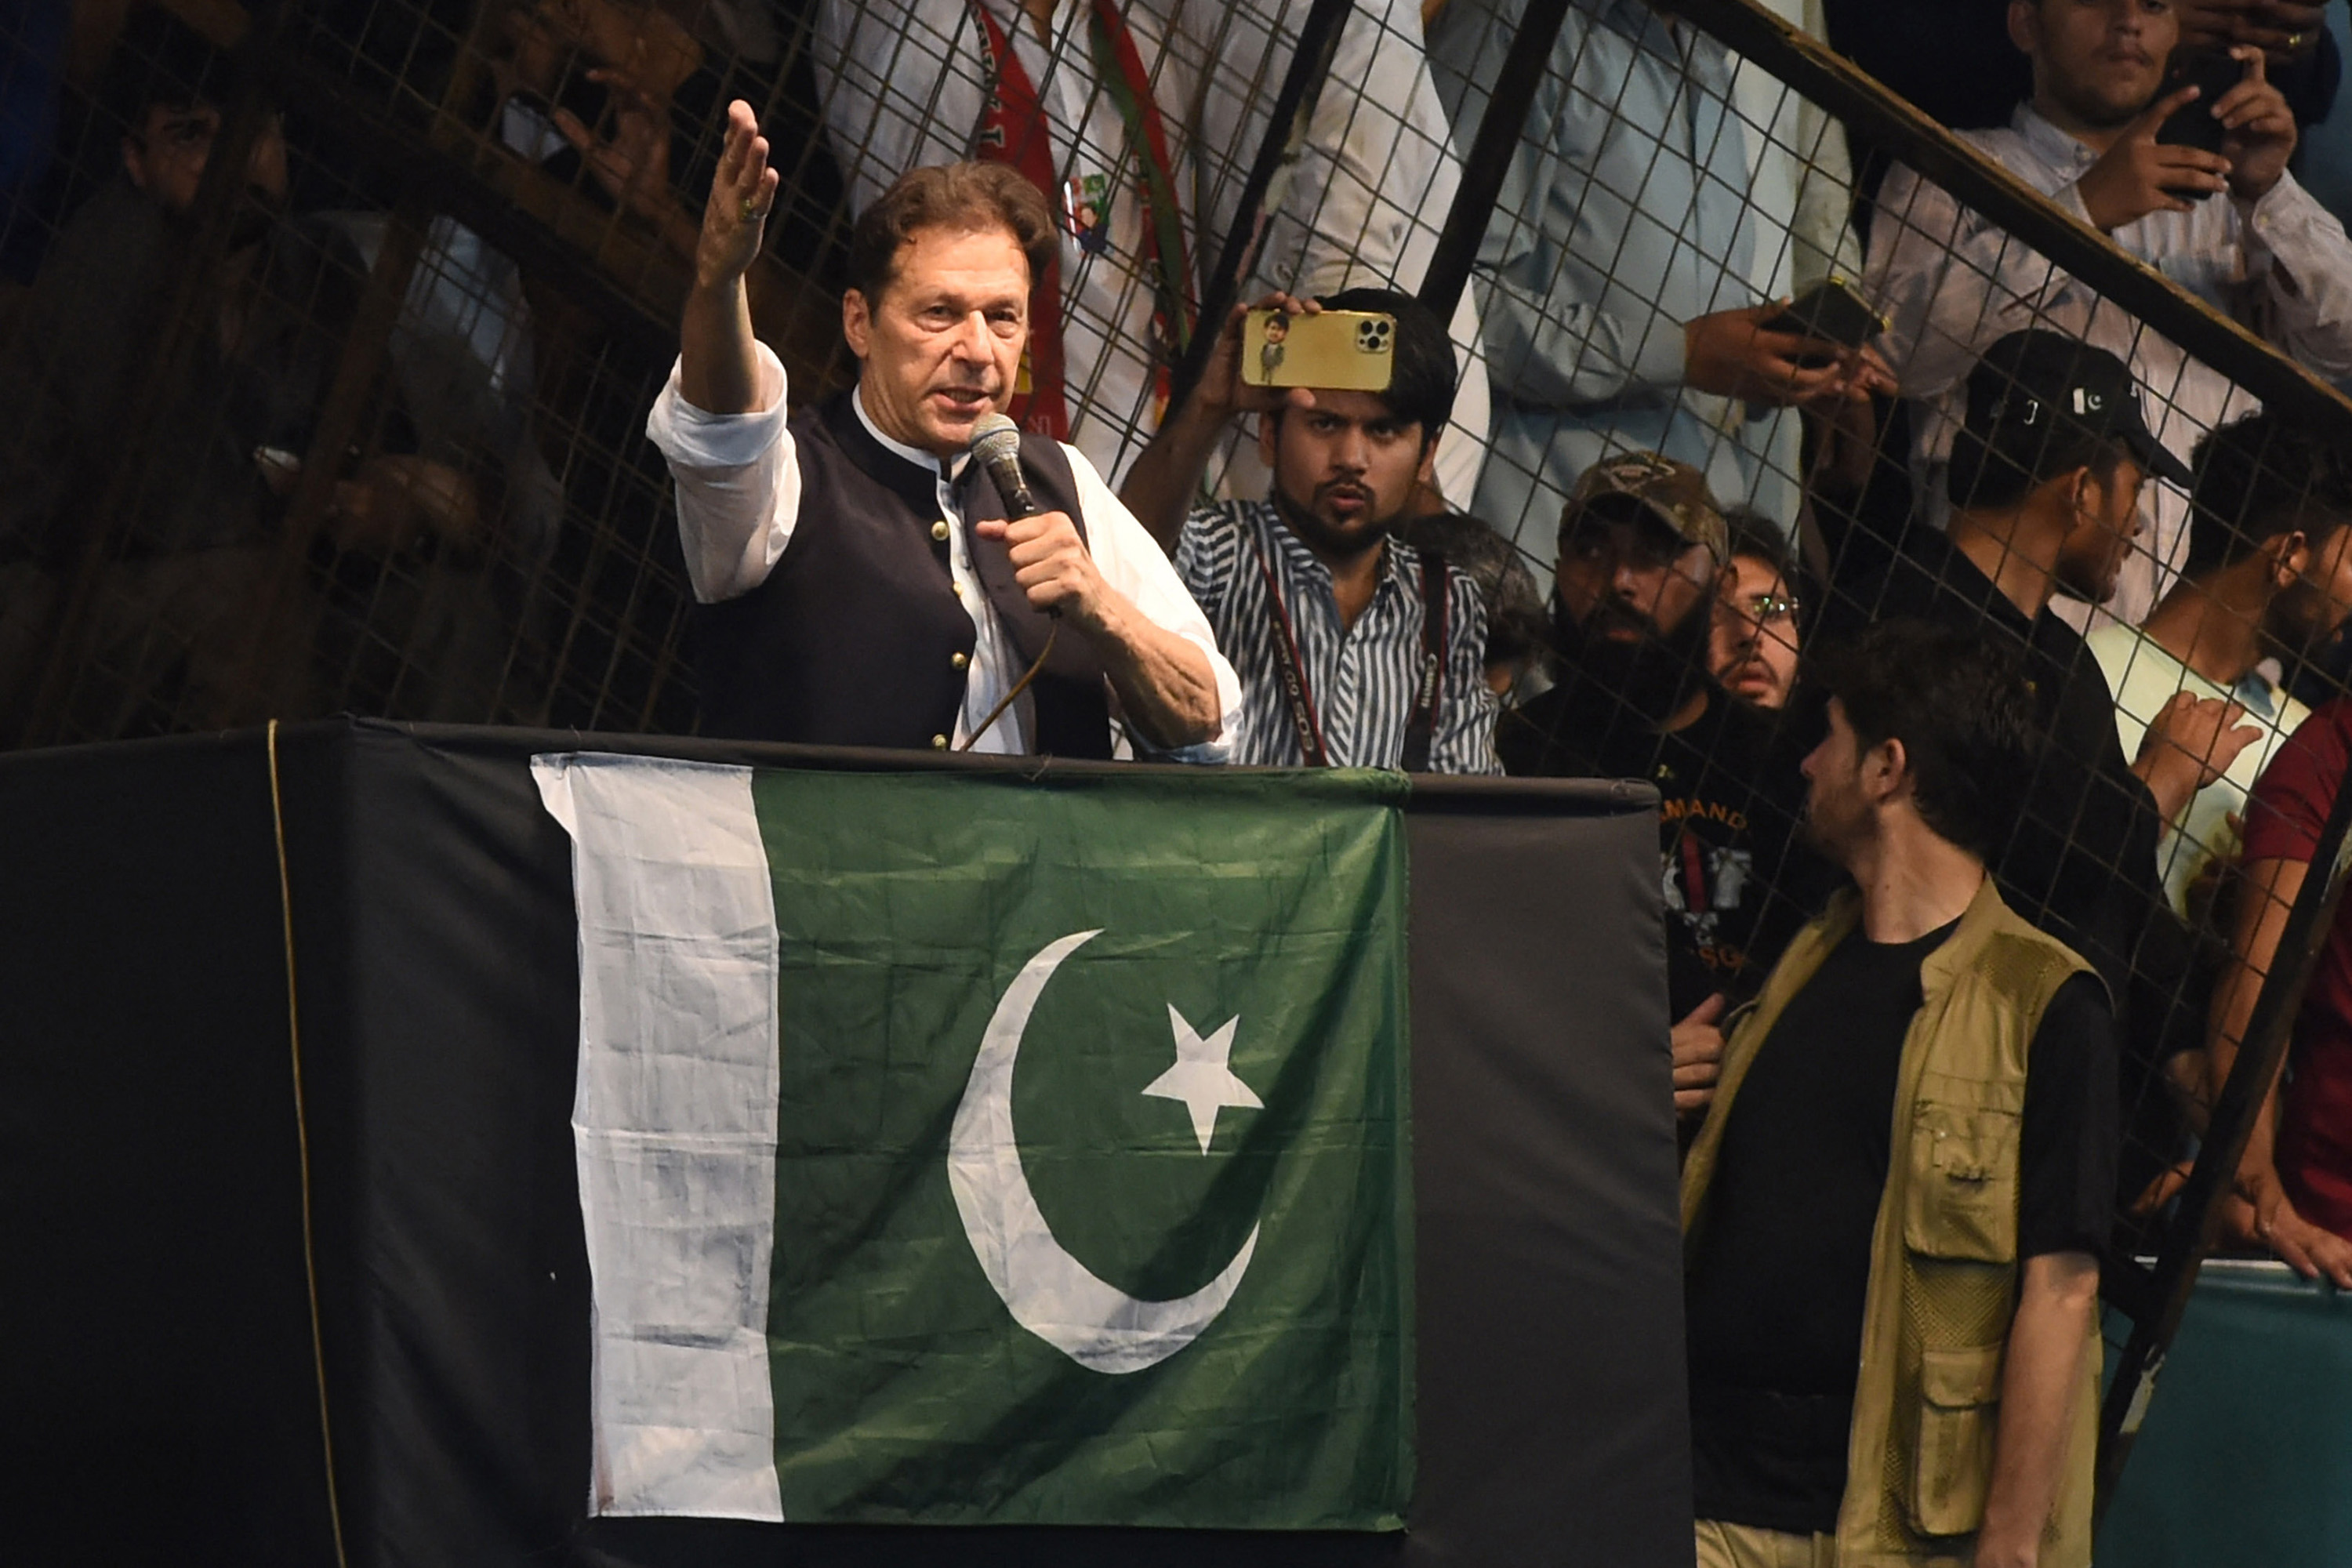 Imran Khan speaks to supporters at a rally in Lahore, Pakistan, on Aug. 13.